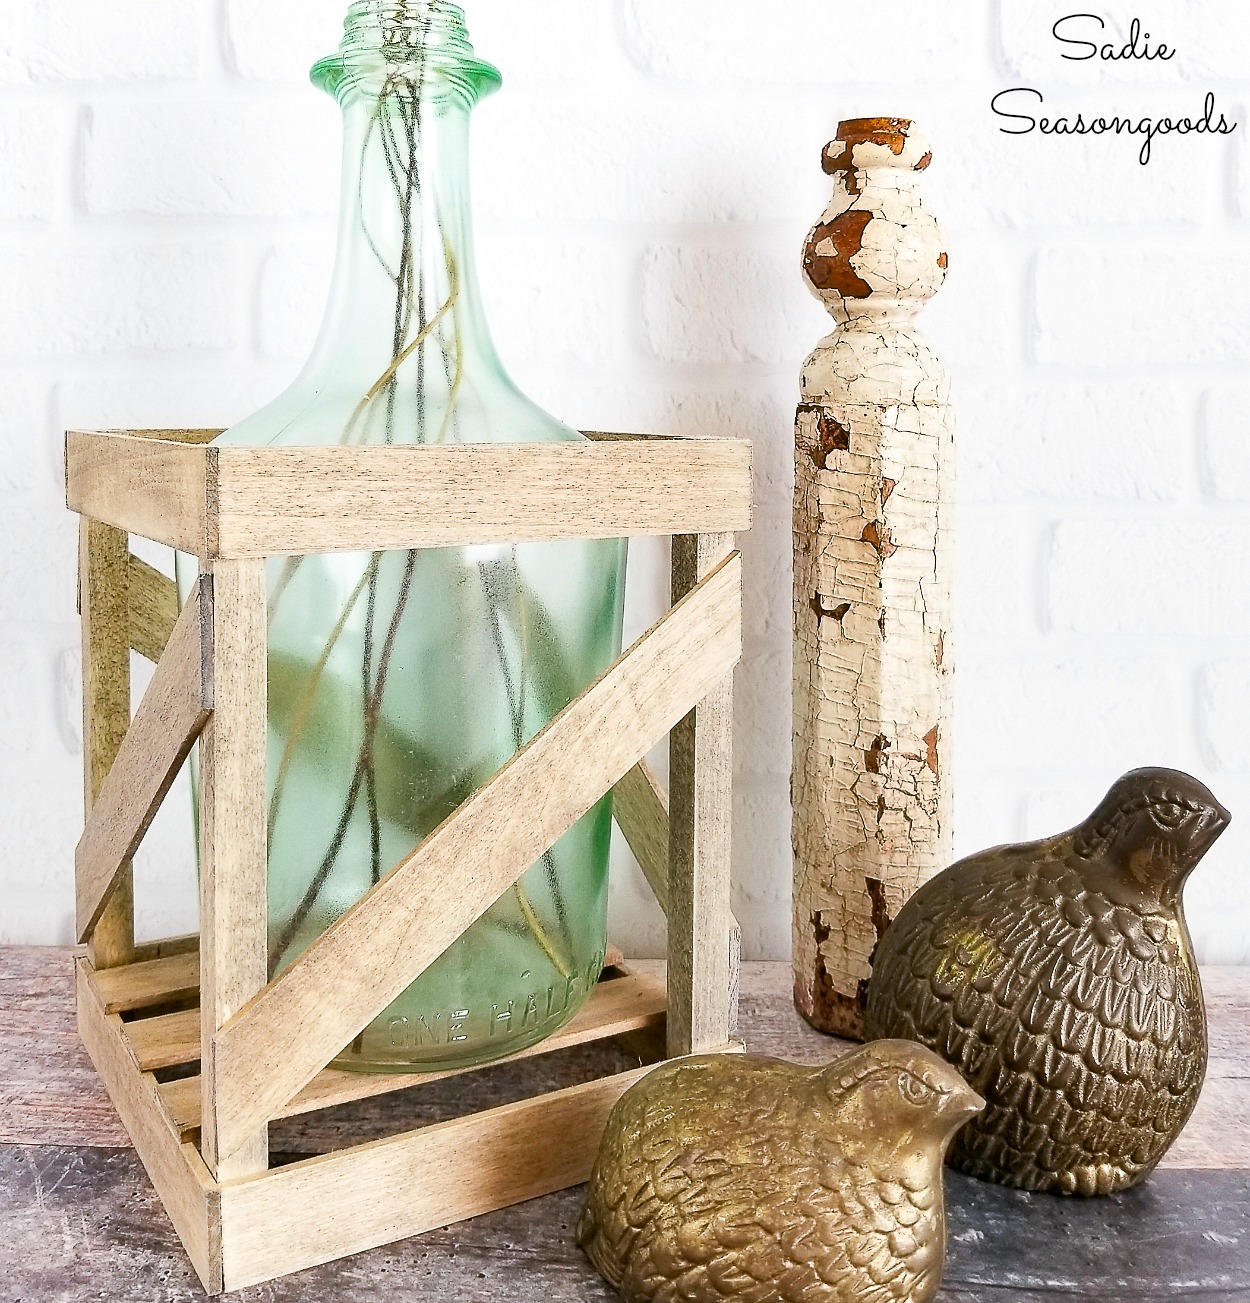 Making a demijohn vase with empty wine bottles or a class carboy for French Country decor